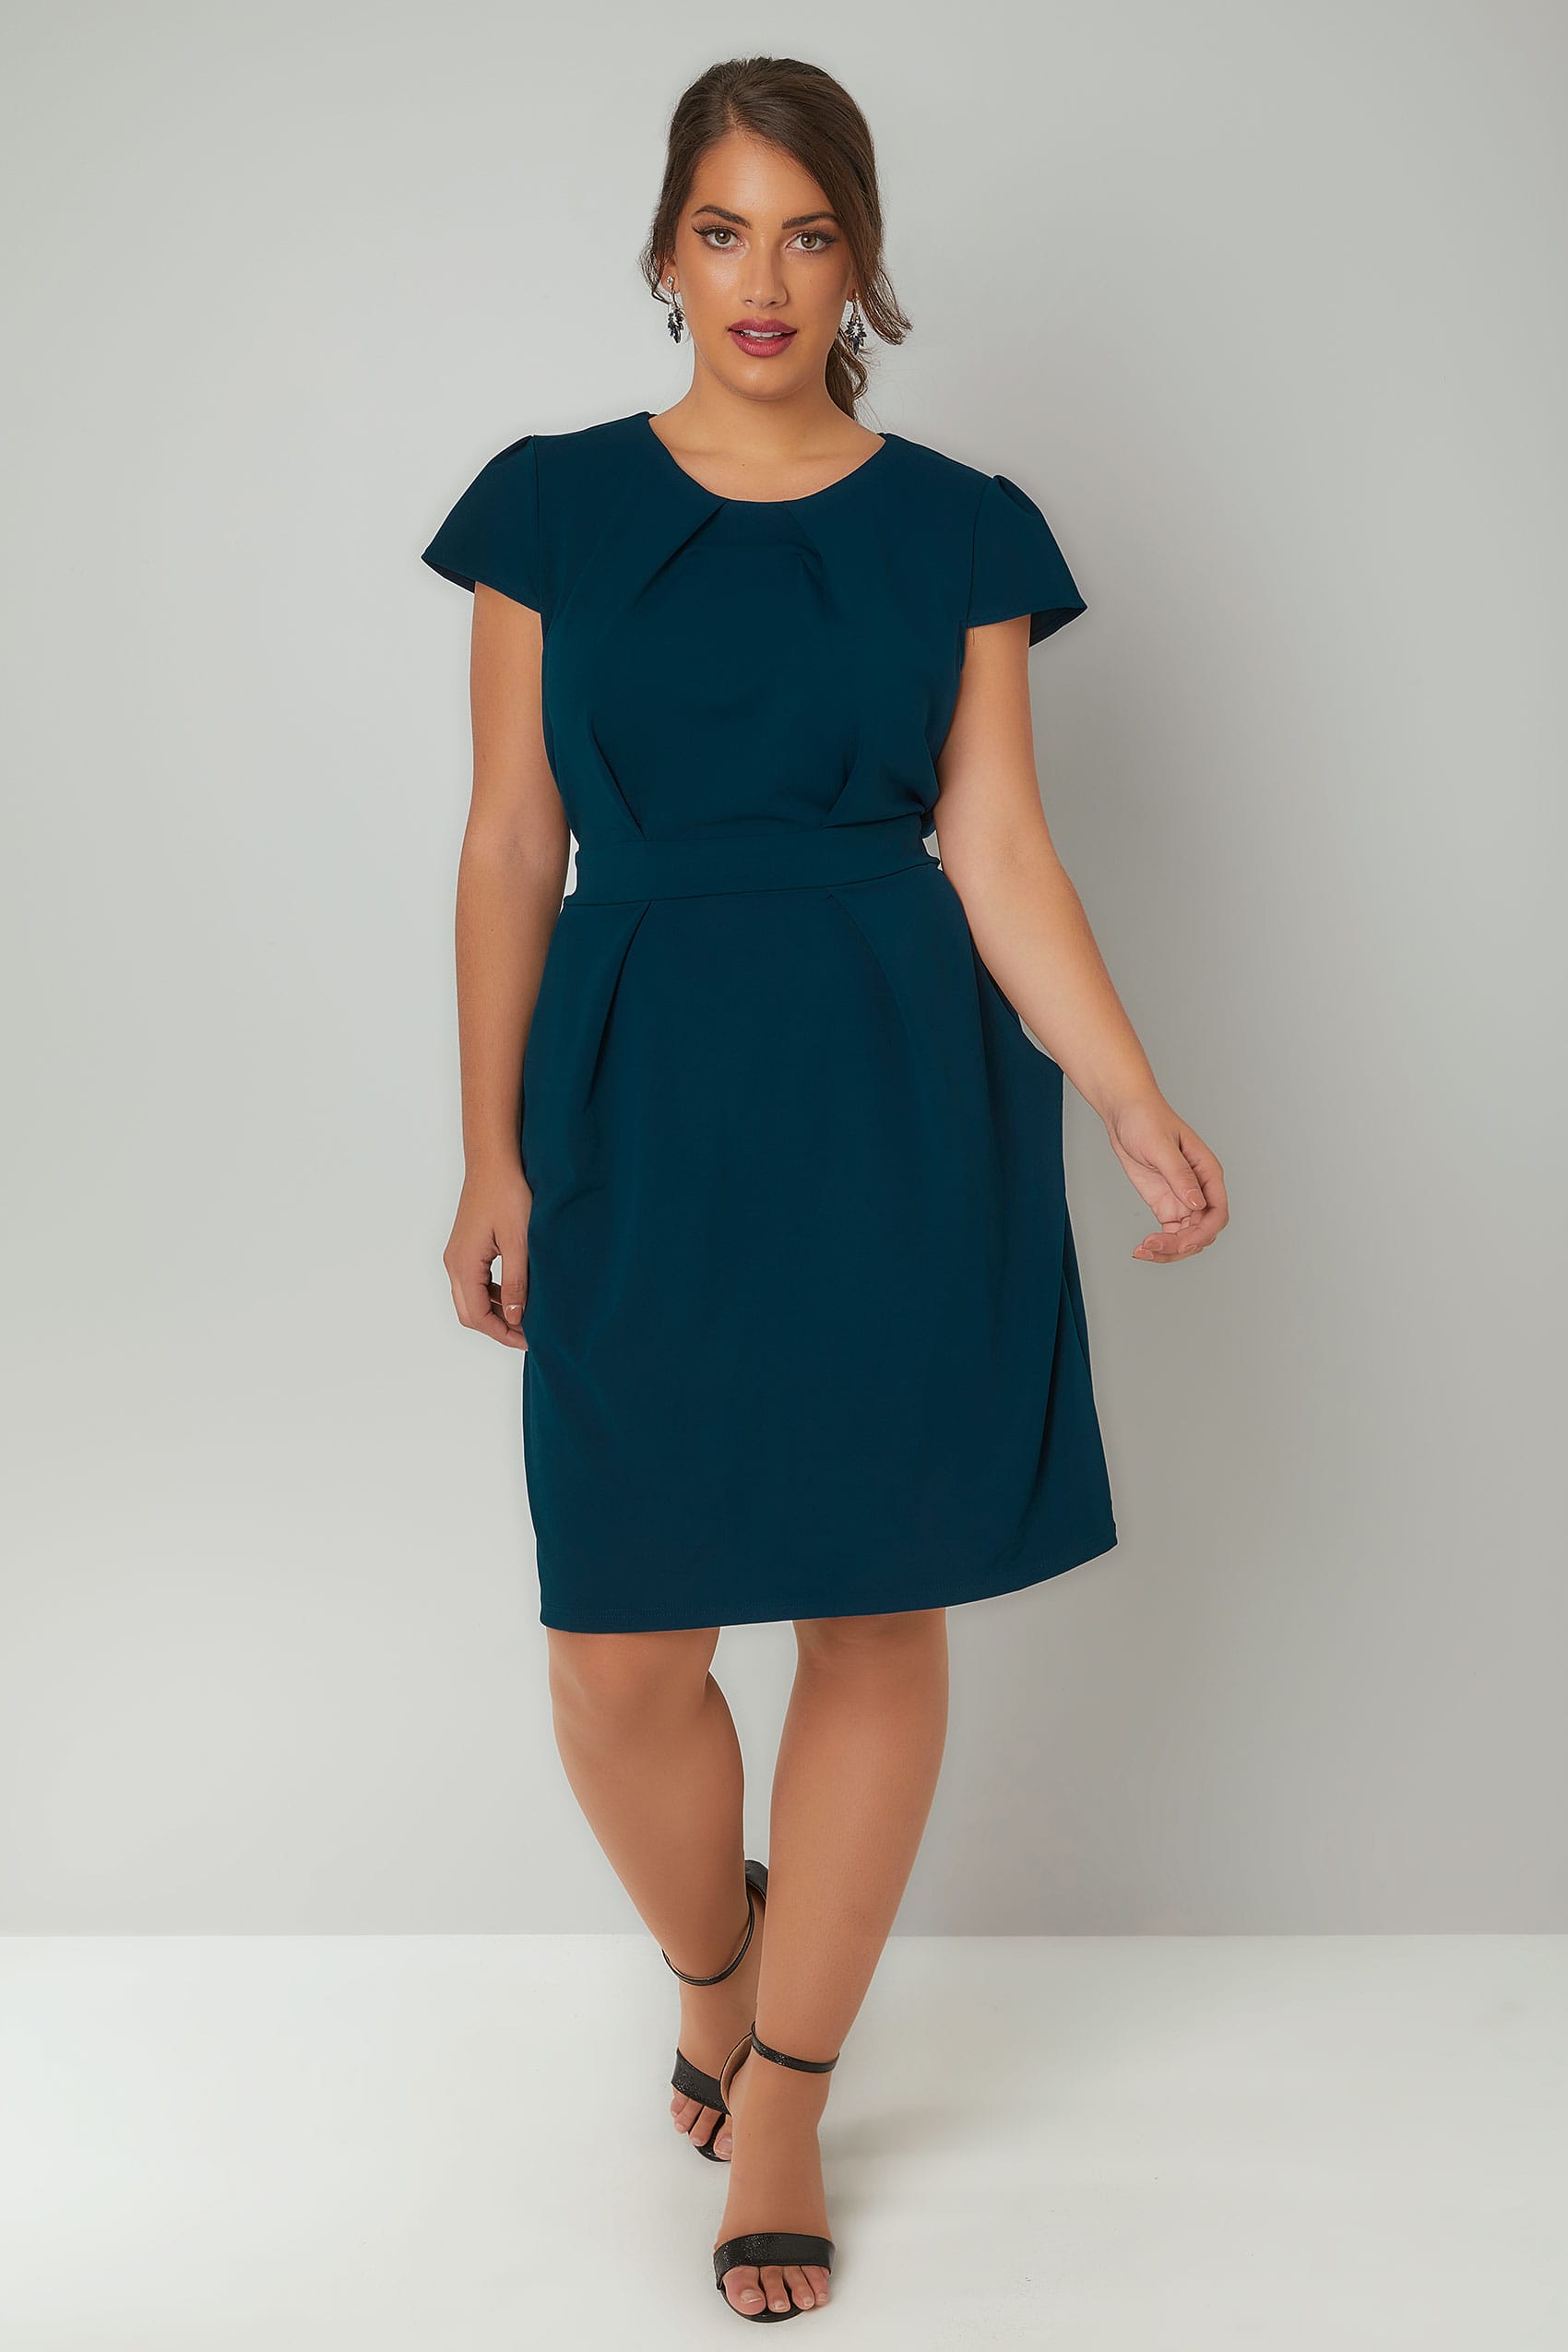 BLUE VANILLA CURVE Teal Blue Shift Dress With Pockets, Plus size 18 to 28